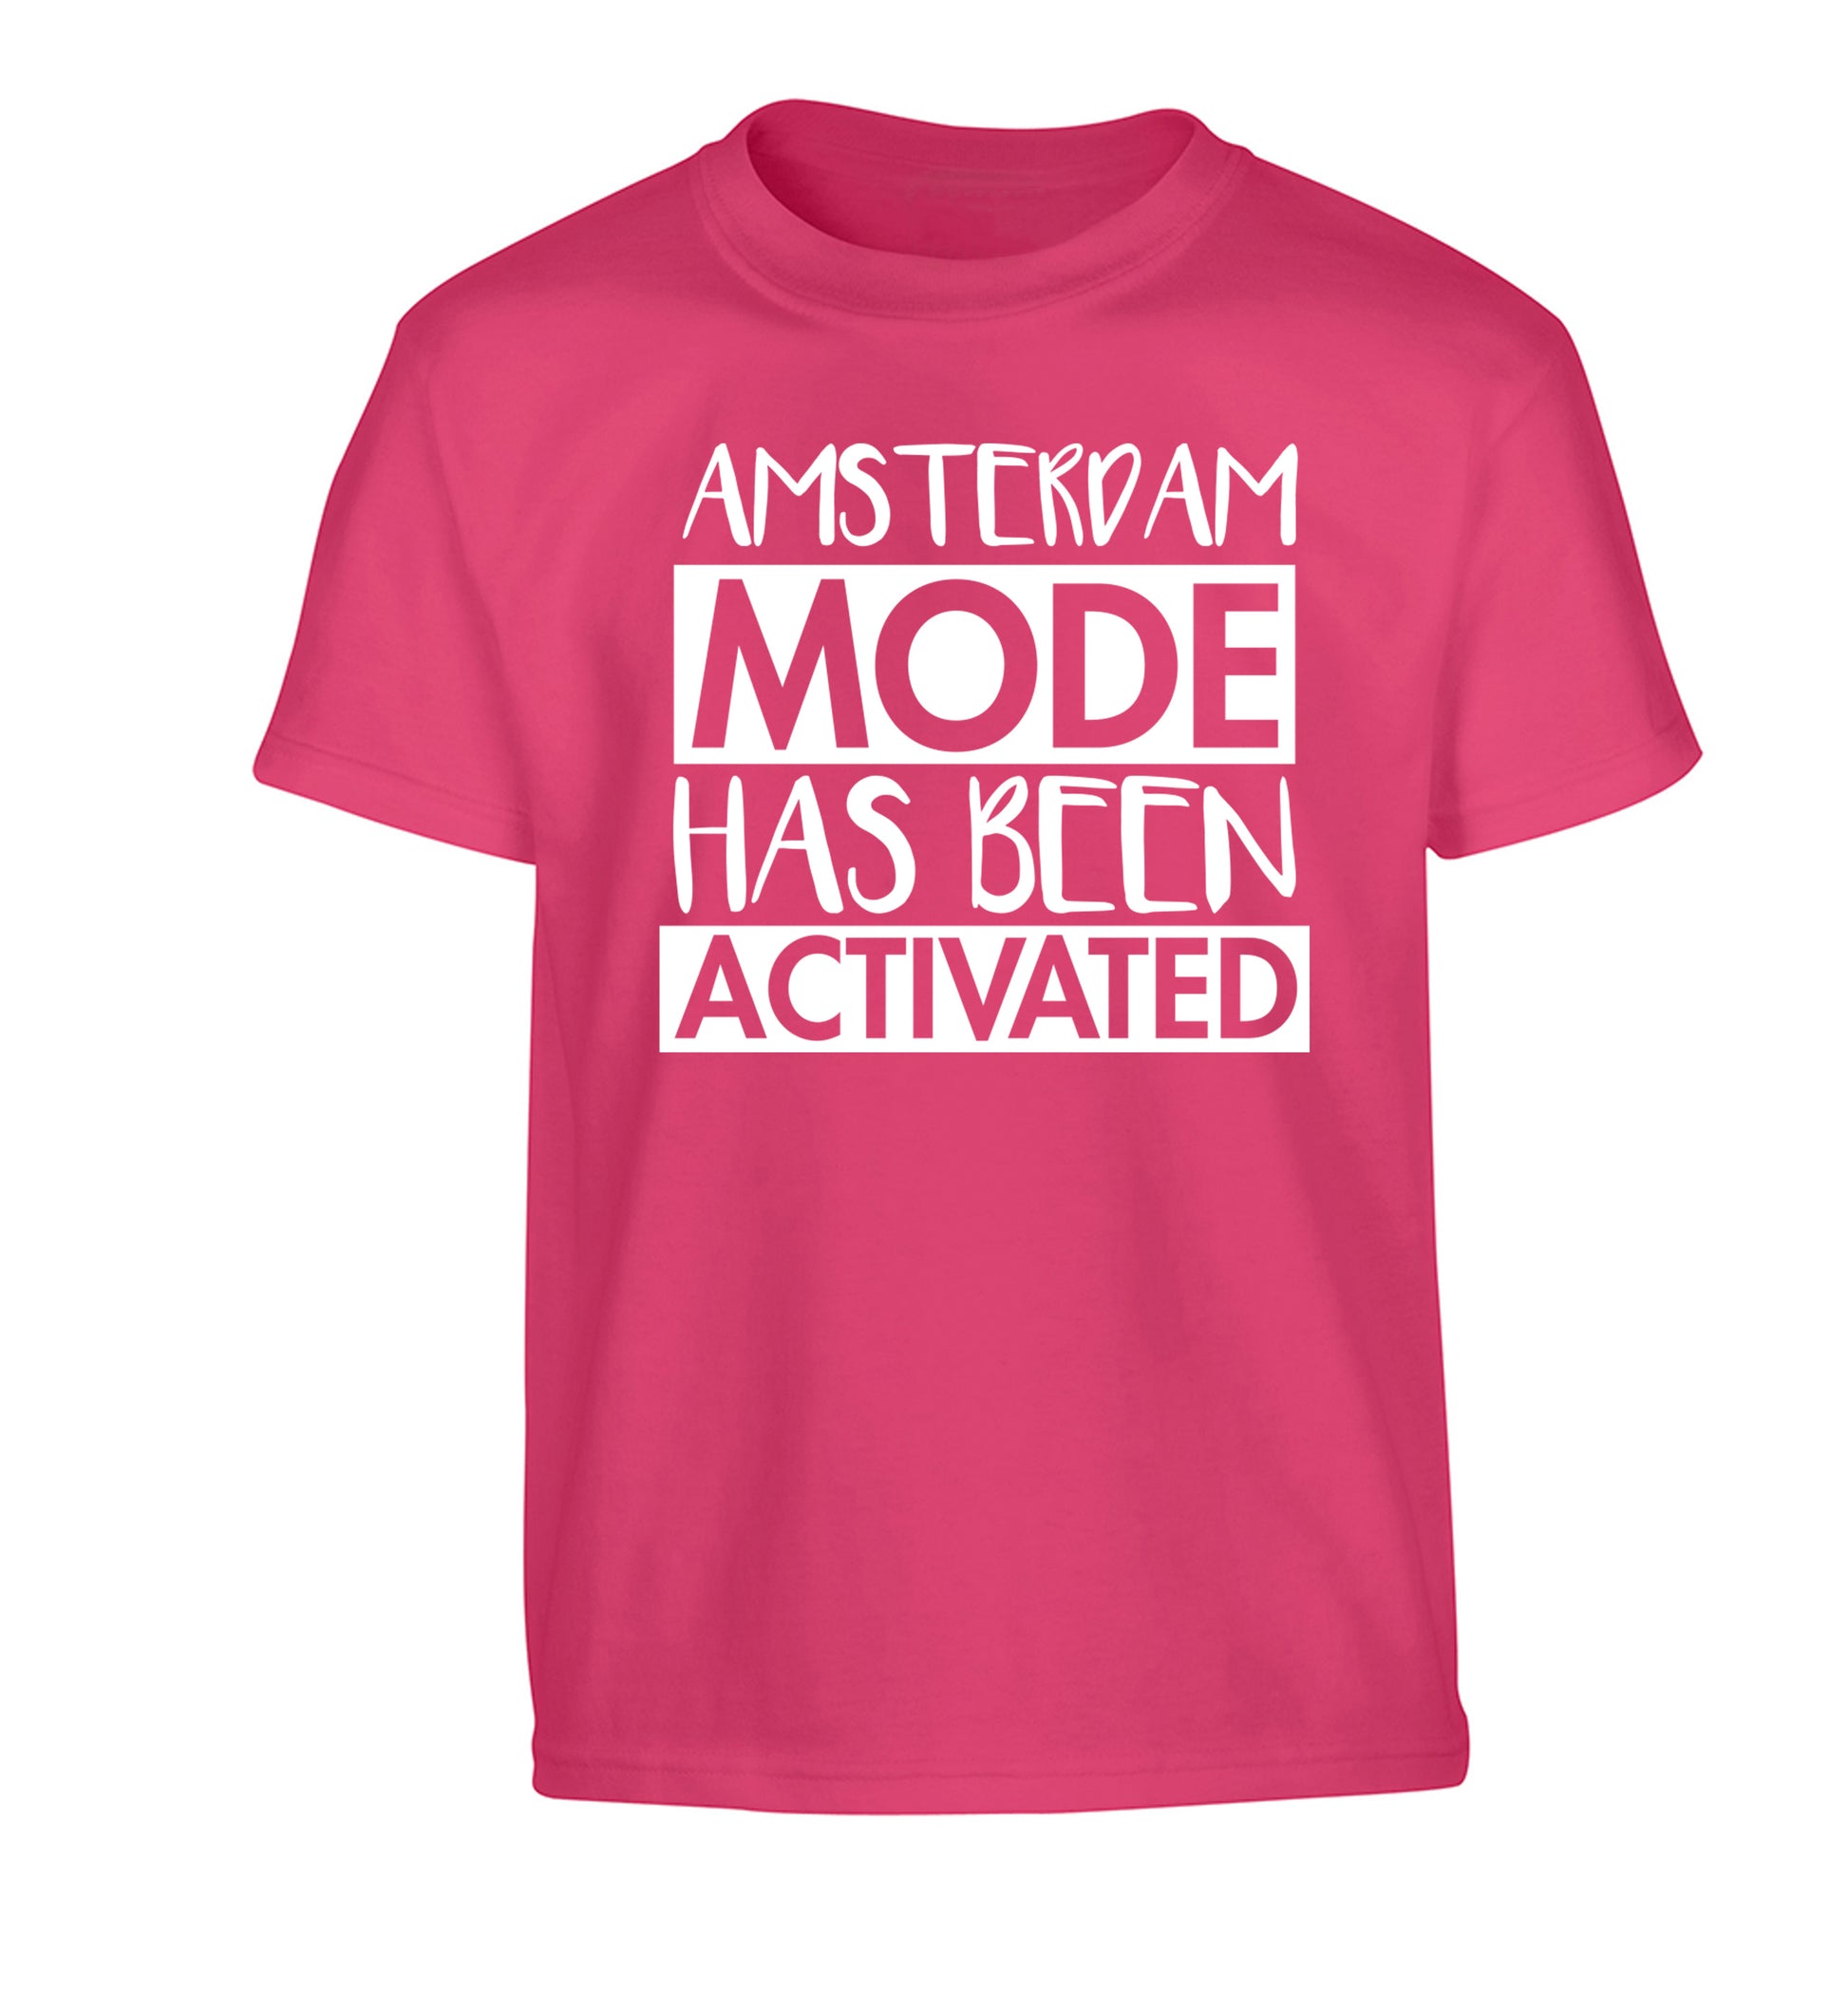 Amsterdam mode has been activated Children's pink Tshirt 12-13 Years